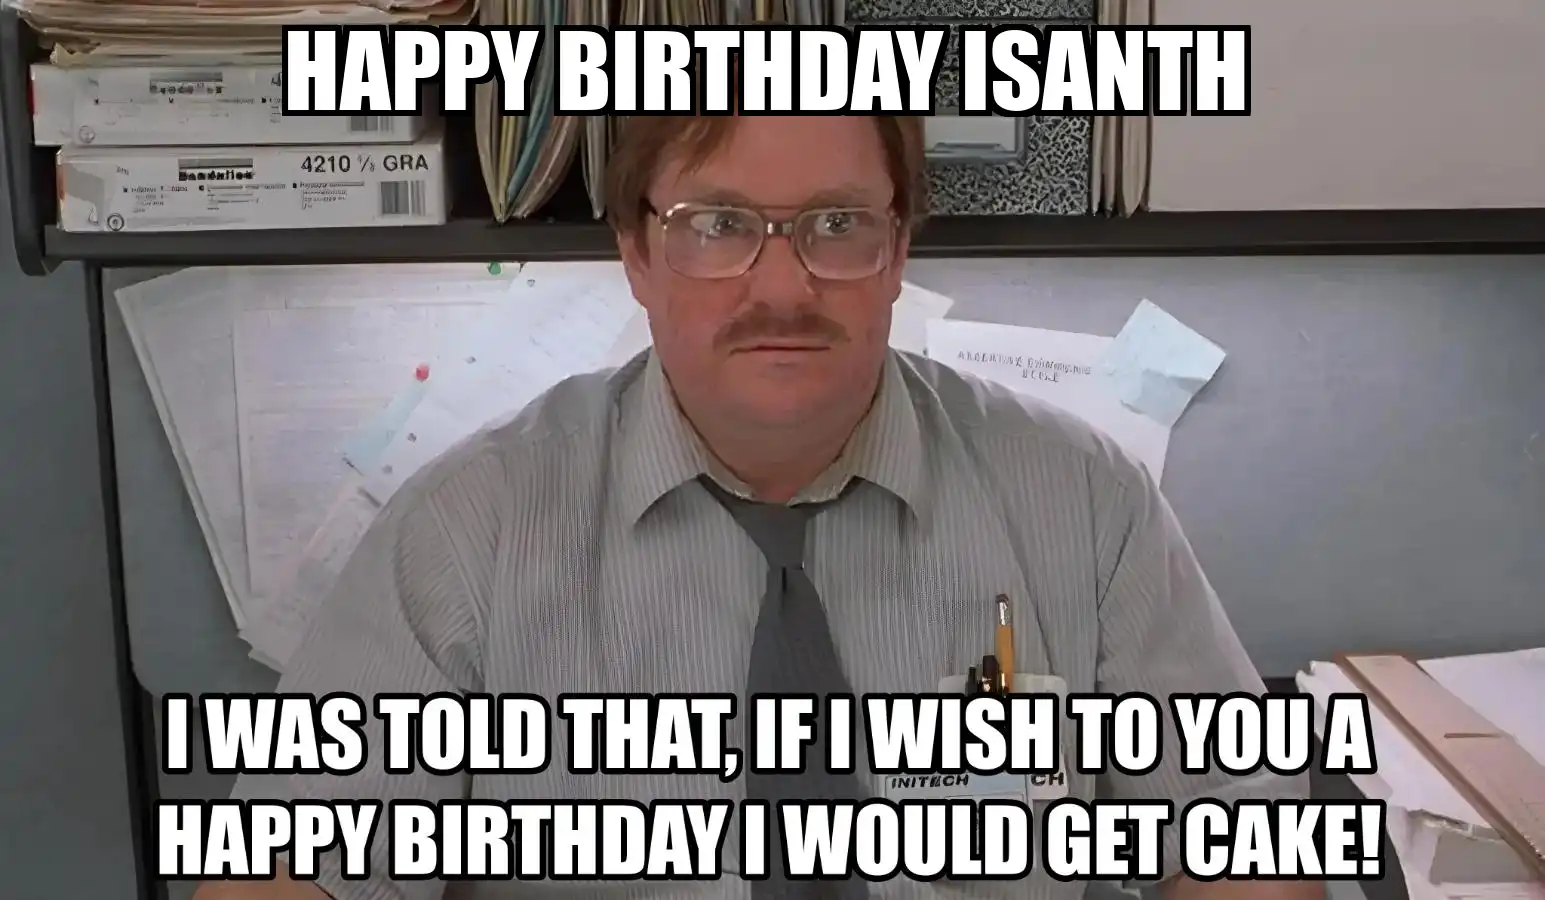 Happy Birthday Isanth I Would Get A Cake Meme